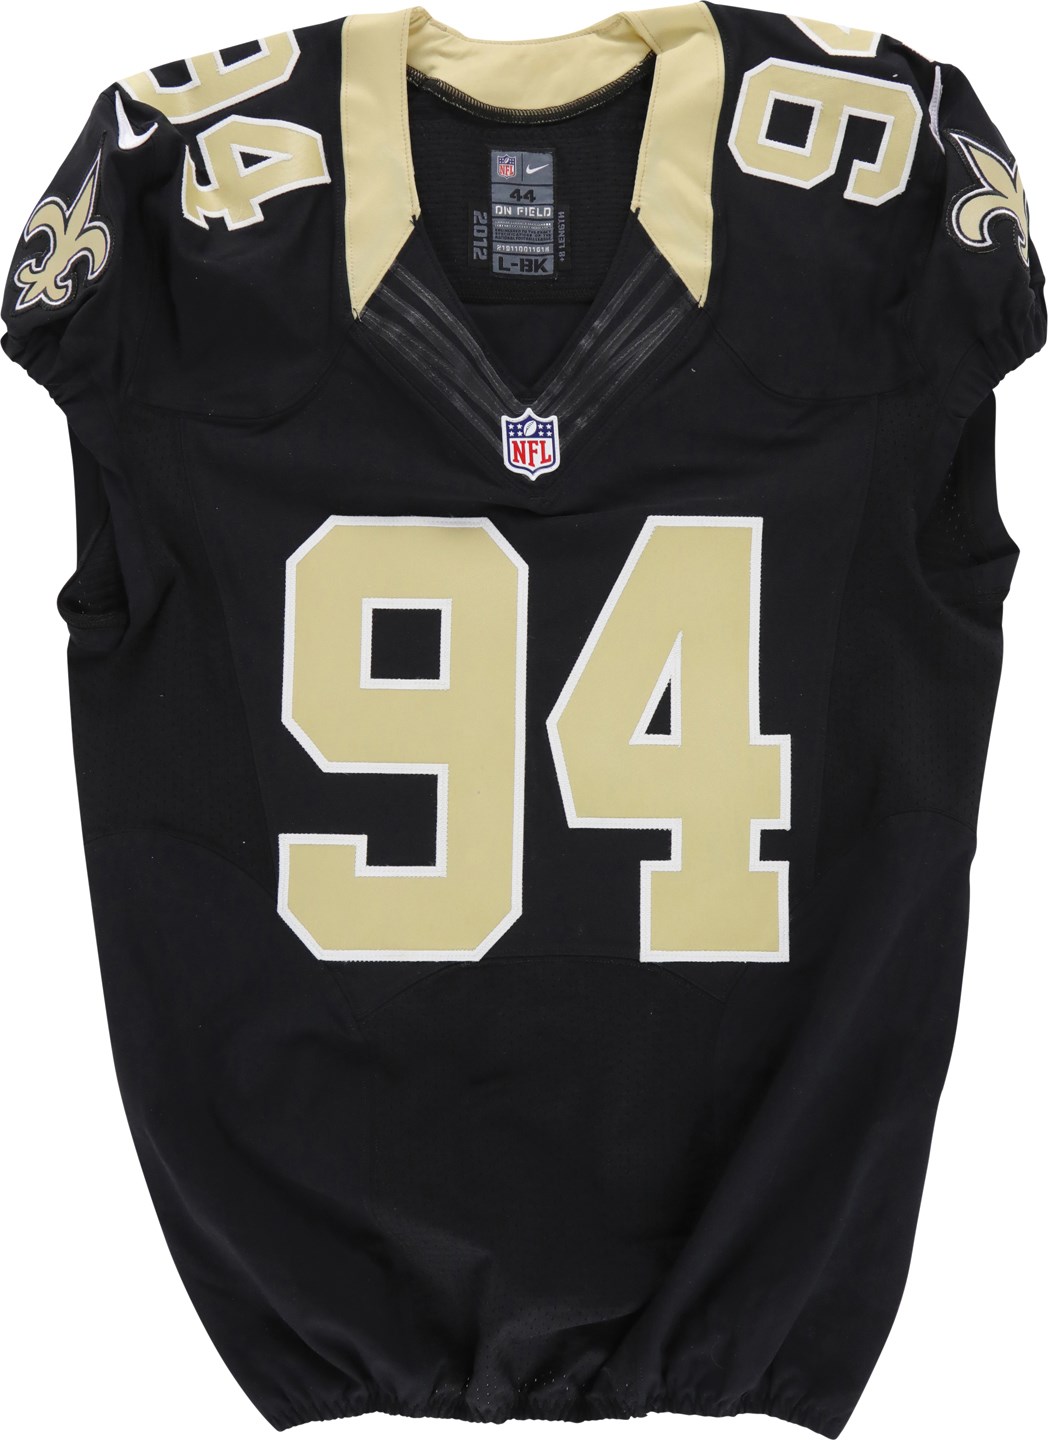 Football - 2012 Cam Jordan New Orleans Saints Game Jersey Signed & Inscribed to Adrian Peterson (PSA)